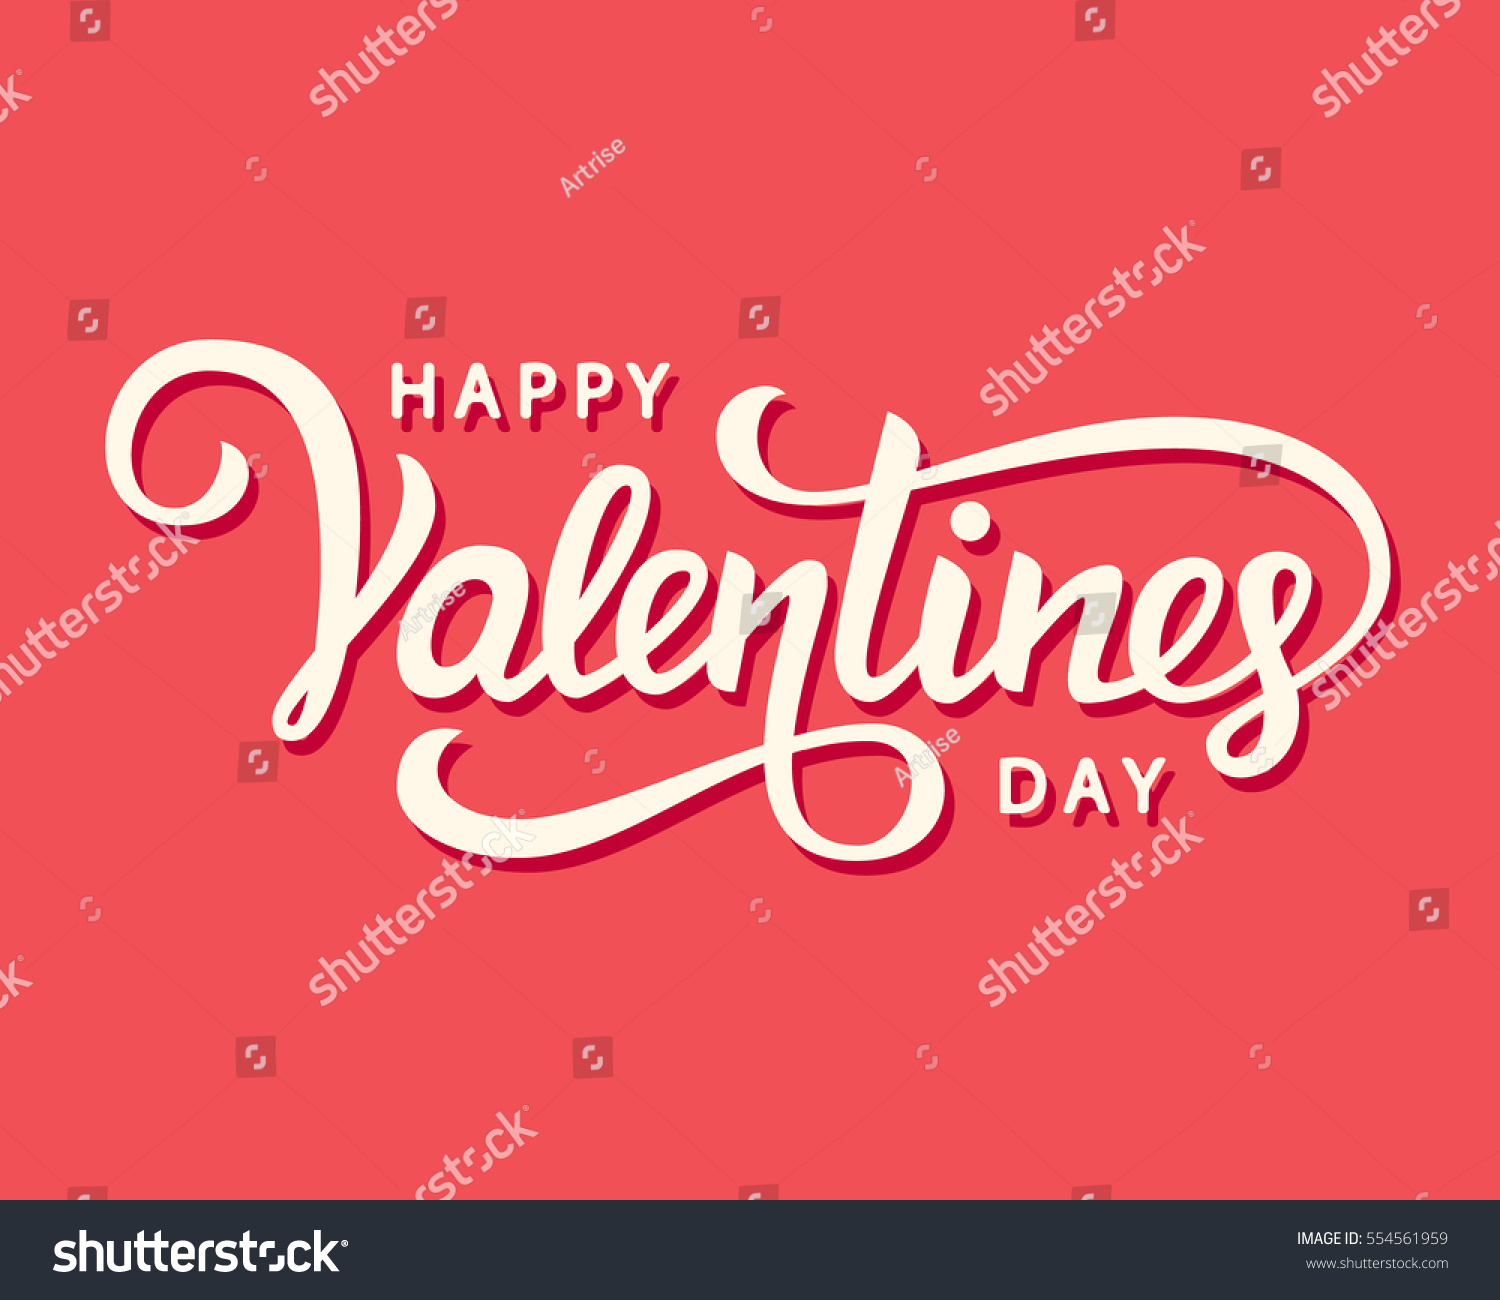 Happy Valentines Day romantic greeting card, typography poster with modern calligraphy. Retro vintage style. Vector Illustration #554561959